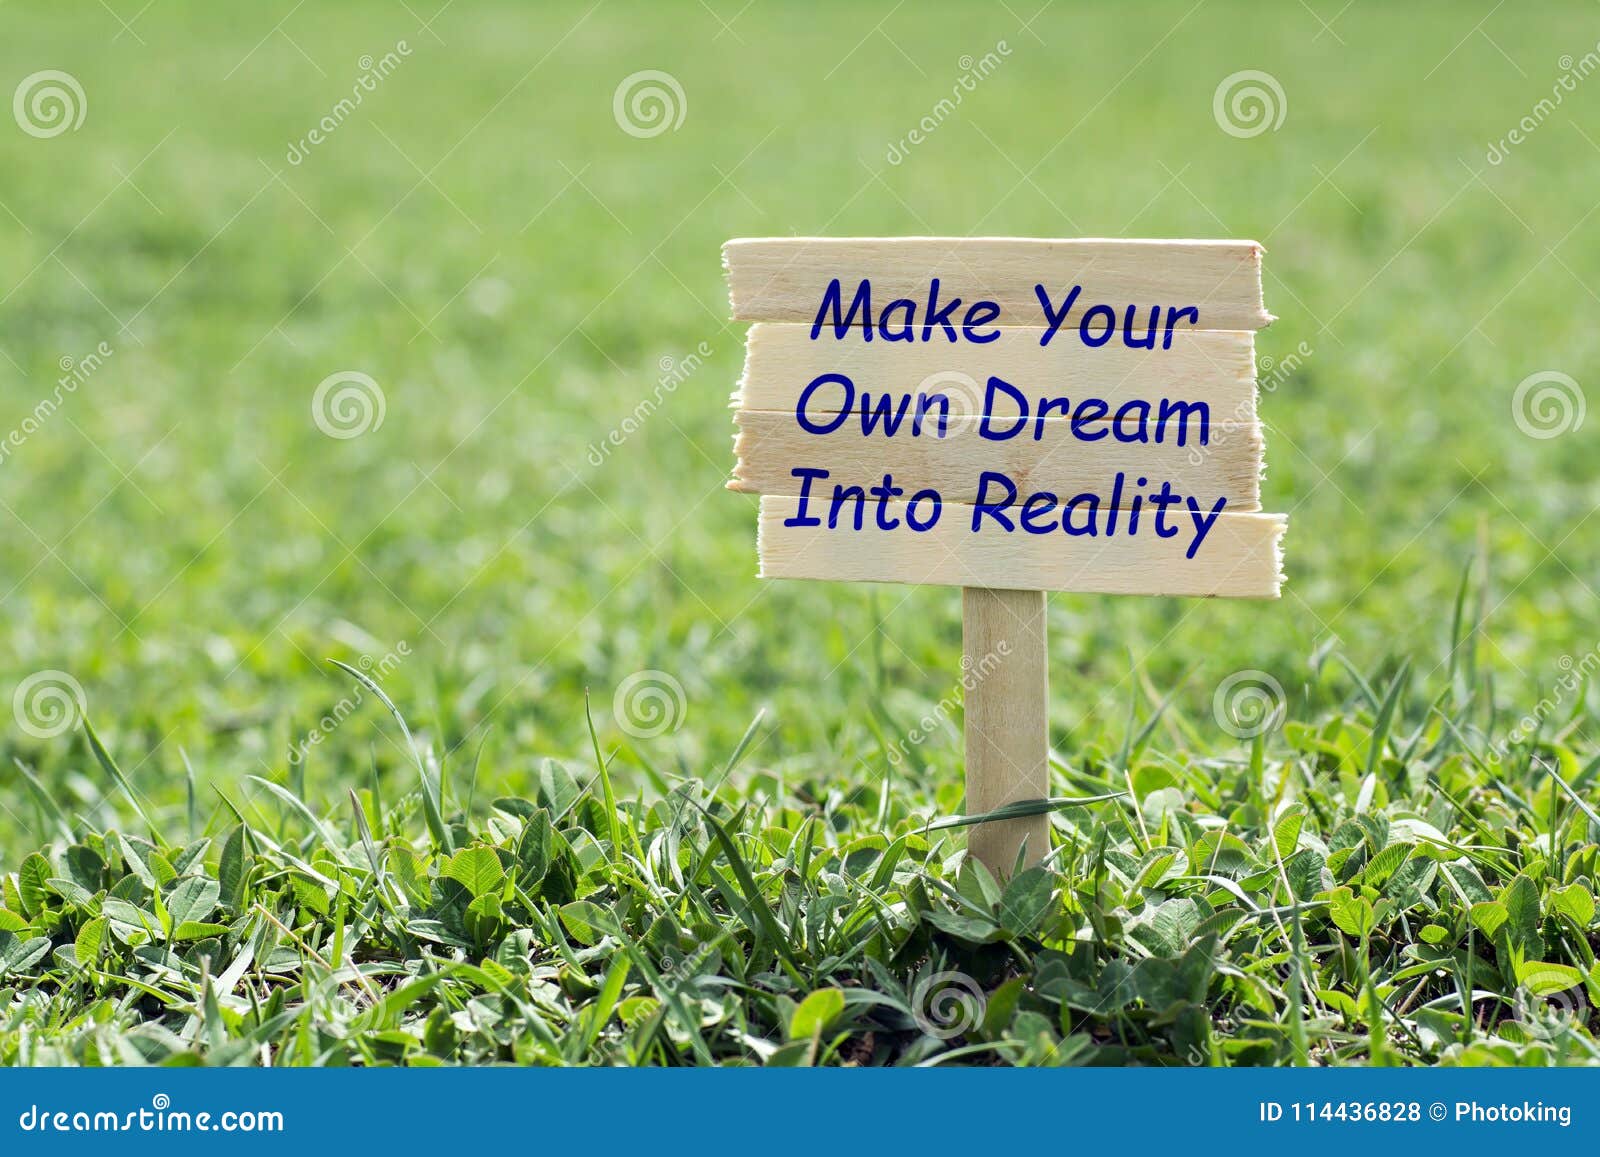 make your own dream into reality